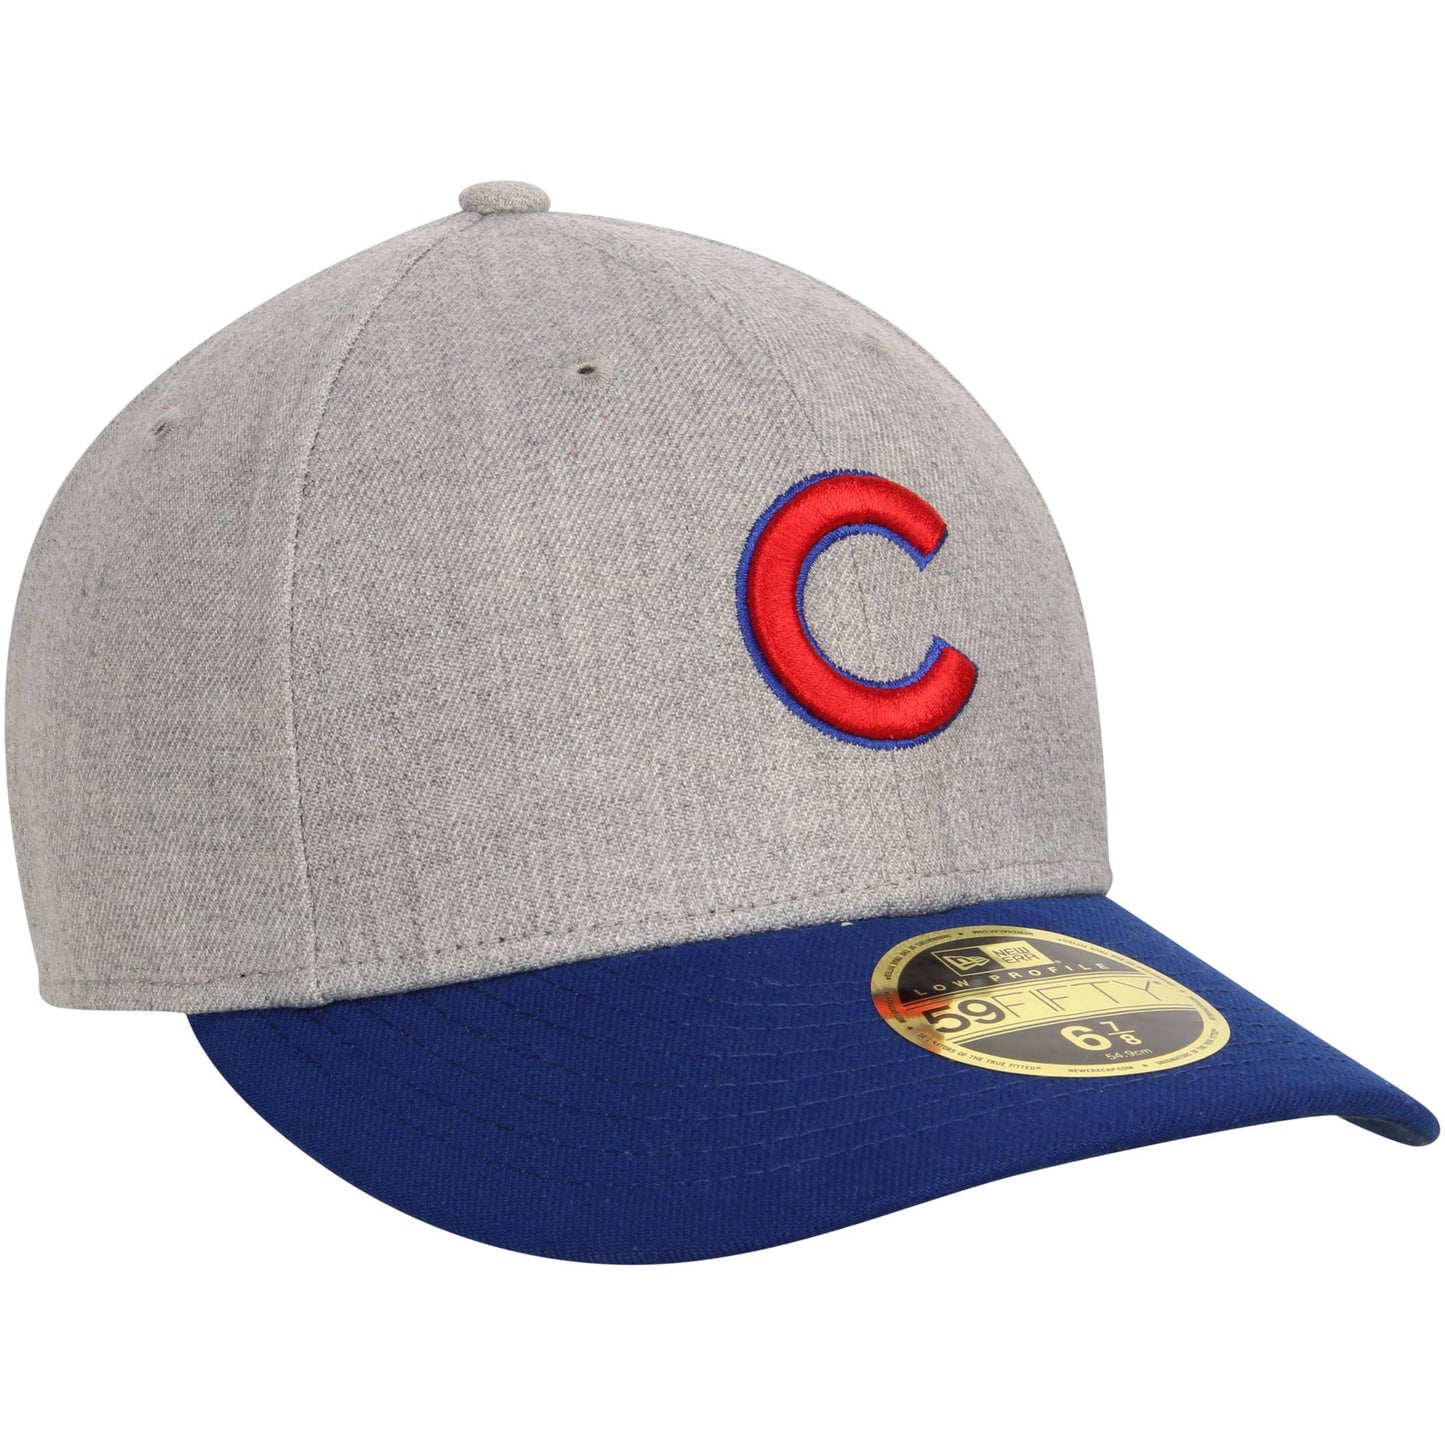 Men's Chicago Cubs New Era Heathered Gray/Royal Change Up Low Profile 59FIFTY Fitted Hat